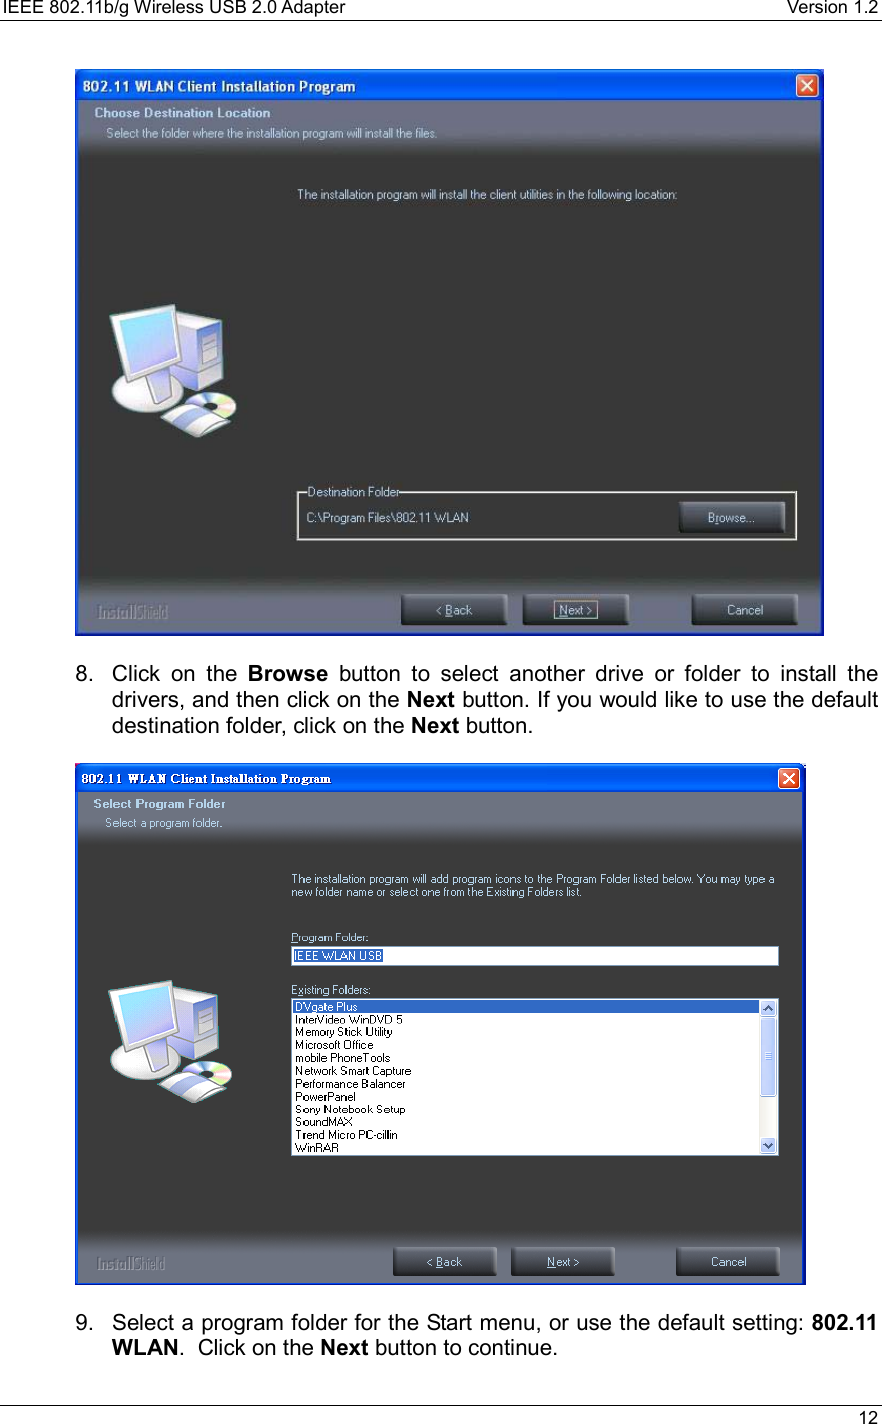 IEEE 802.11b/g Wireless USB 2.0 Adapter    Version 1.2   12    8.  Click on the Browse button to select another drive or folder to install the drivers, and then click on the Next button. If you would like to use the default destination folder, click on the Next button.      9.  Select a program folder for the Start menu, or use the default setting: 802.11 WLAN.  Click on the Next button to continue.  